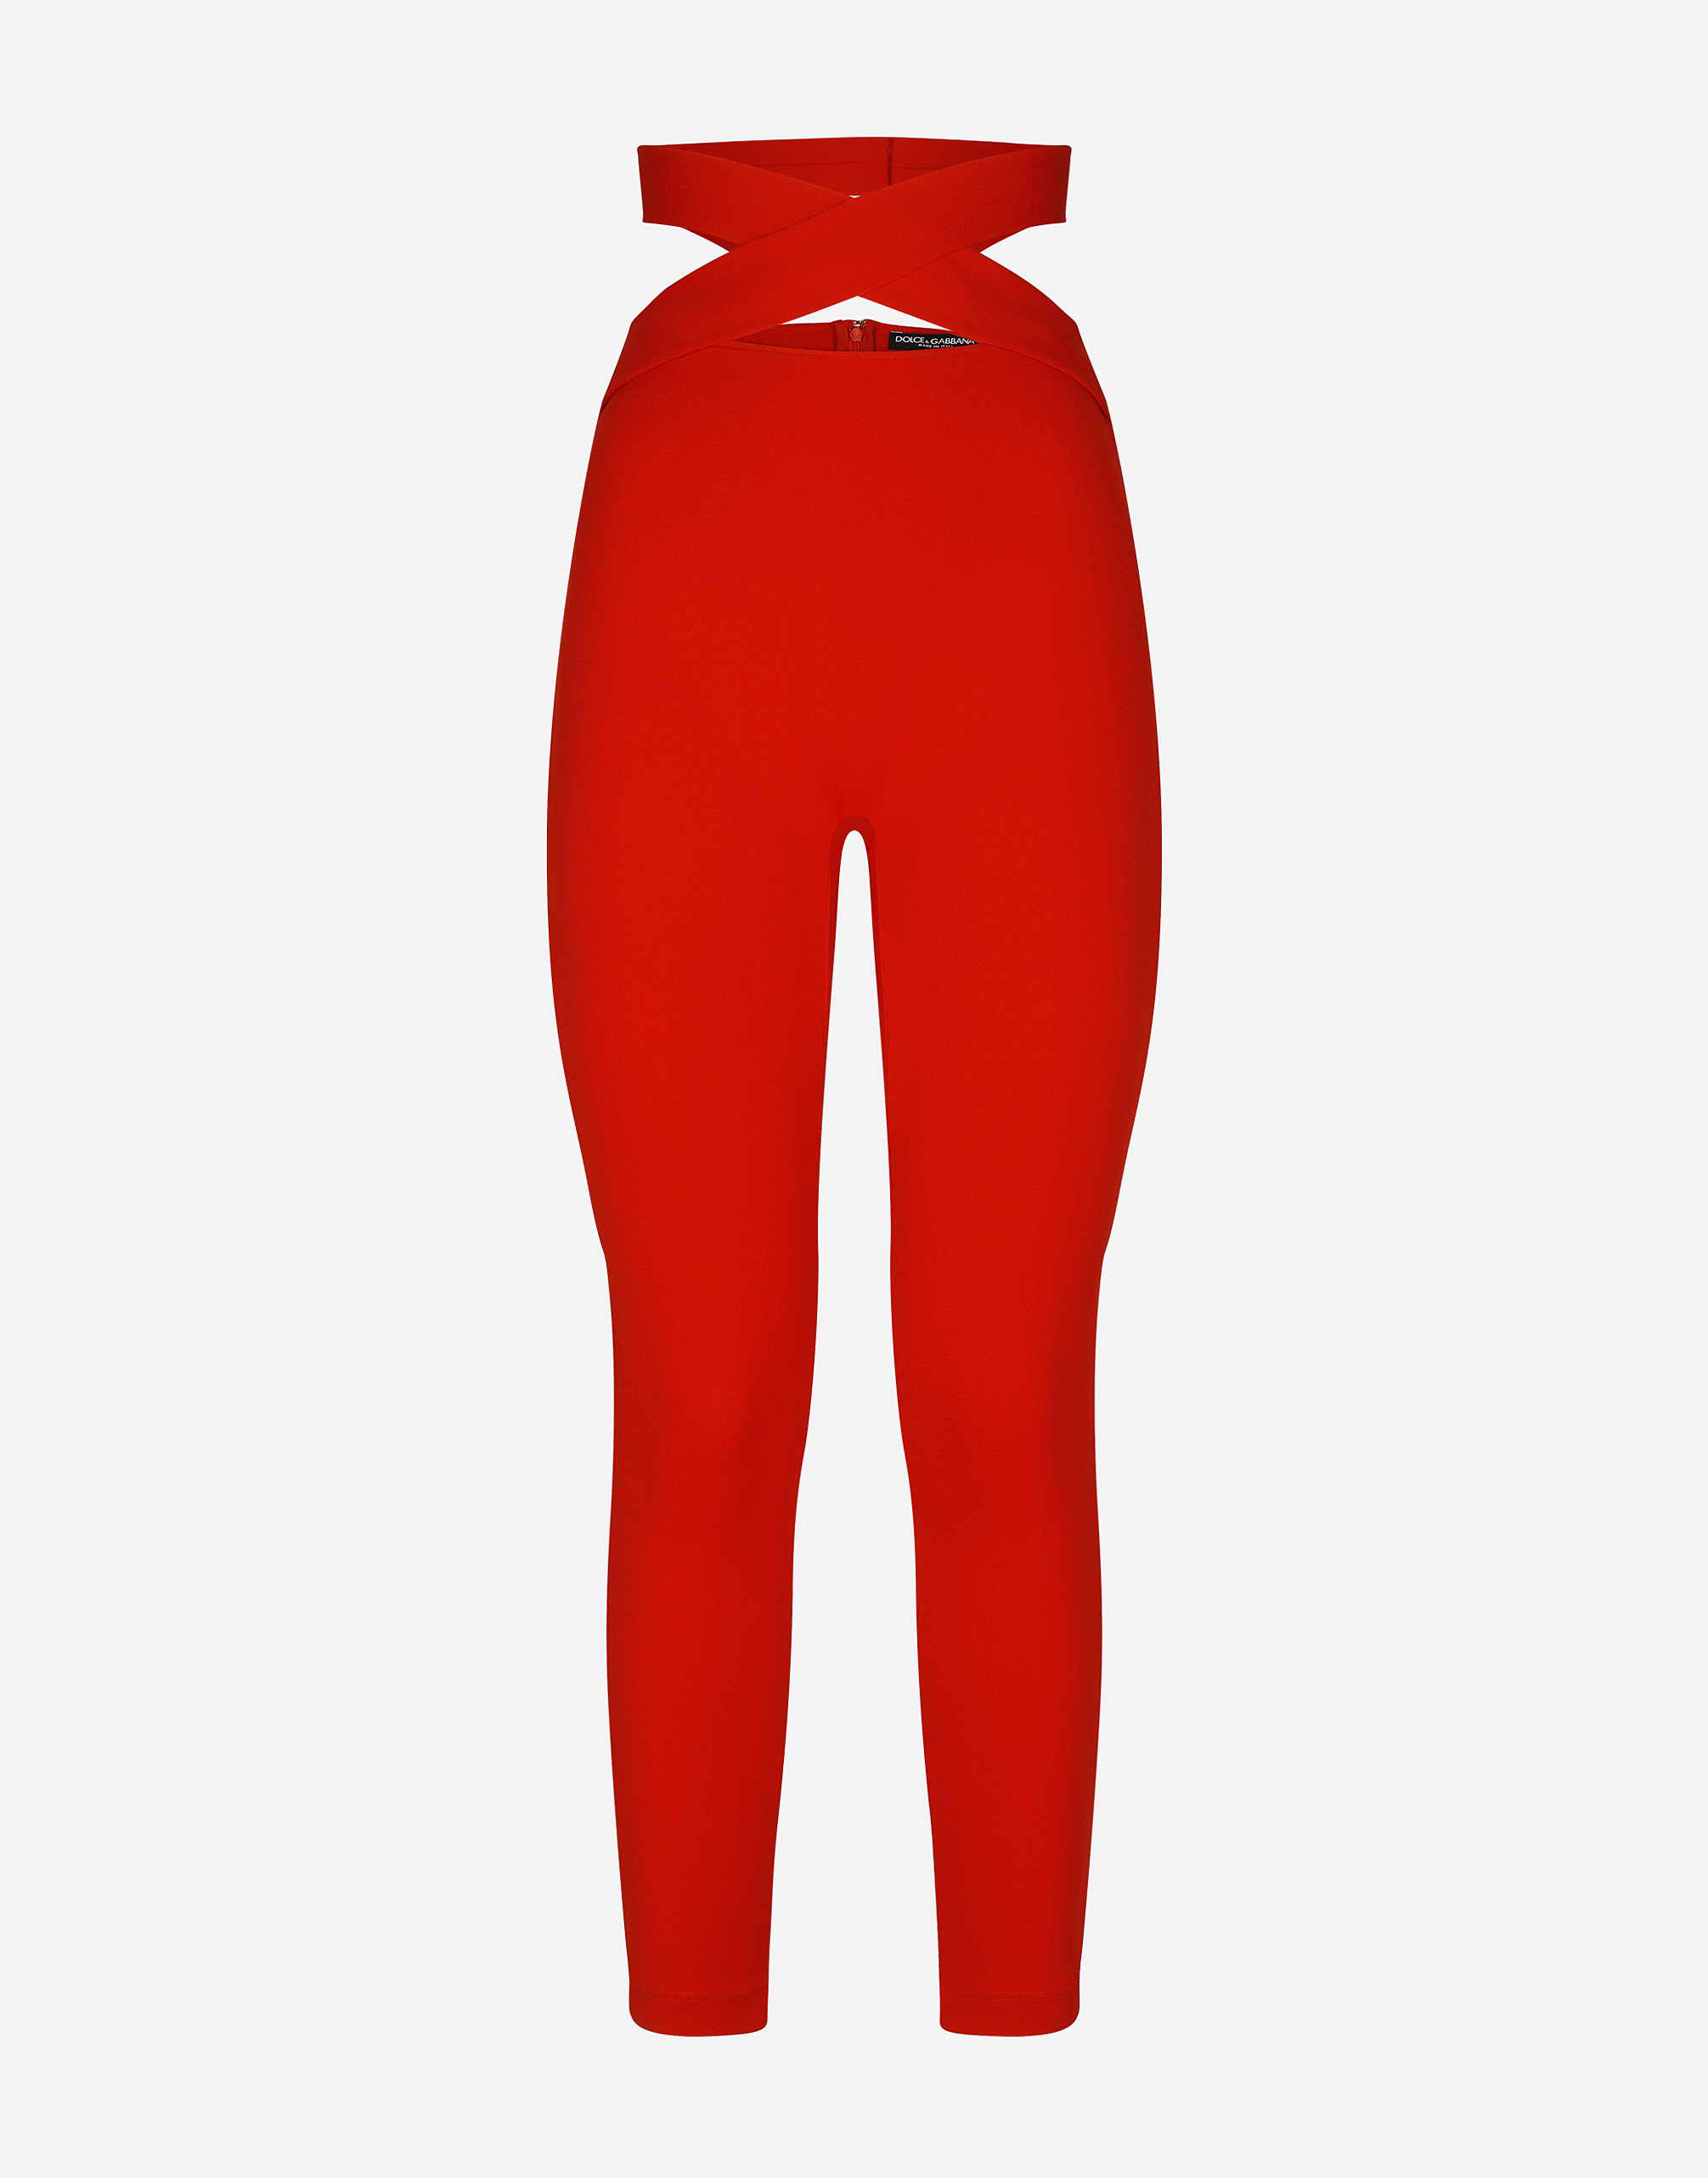 Viscose pants with strap detail in Red